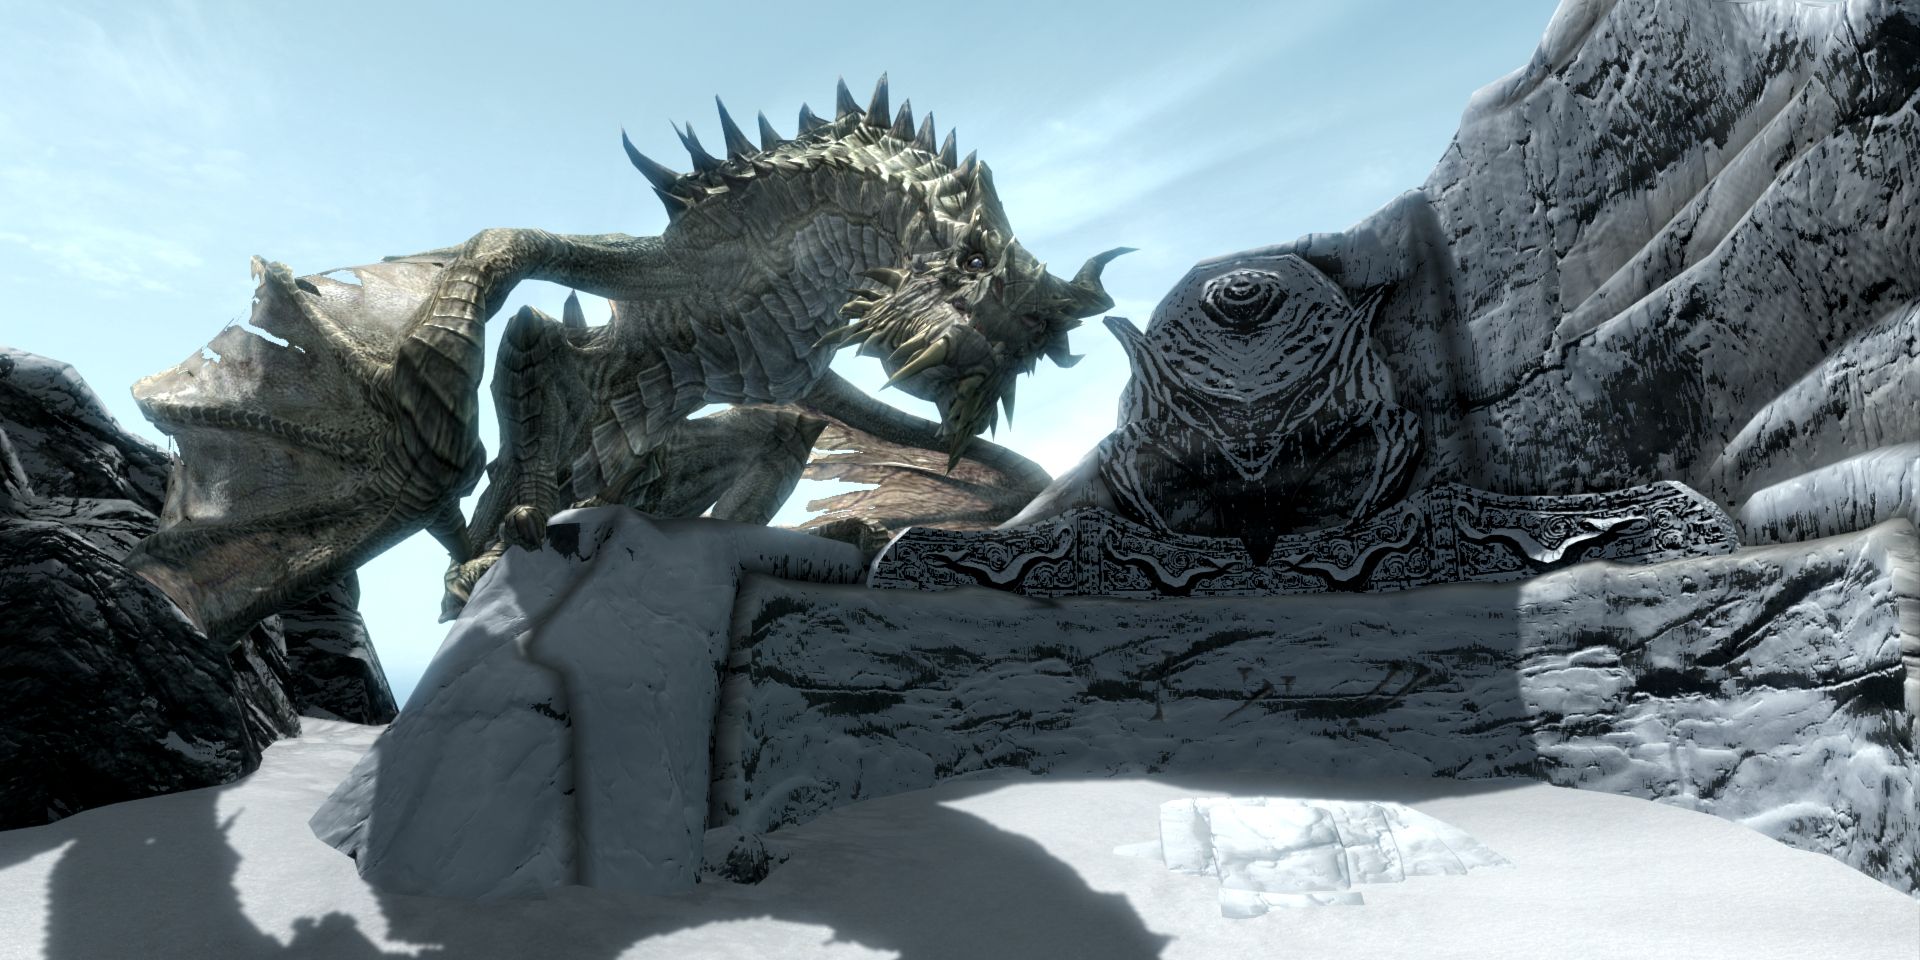 Paarthurnax perched next to a word wall at the Throat of the World in Skyrim